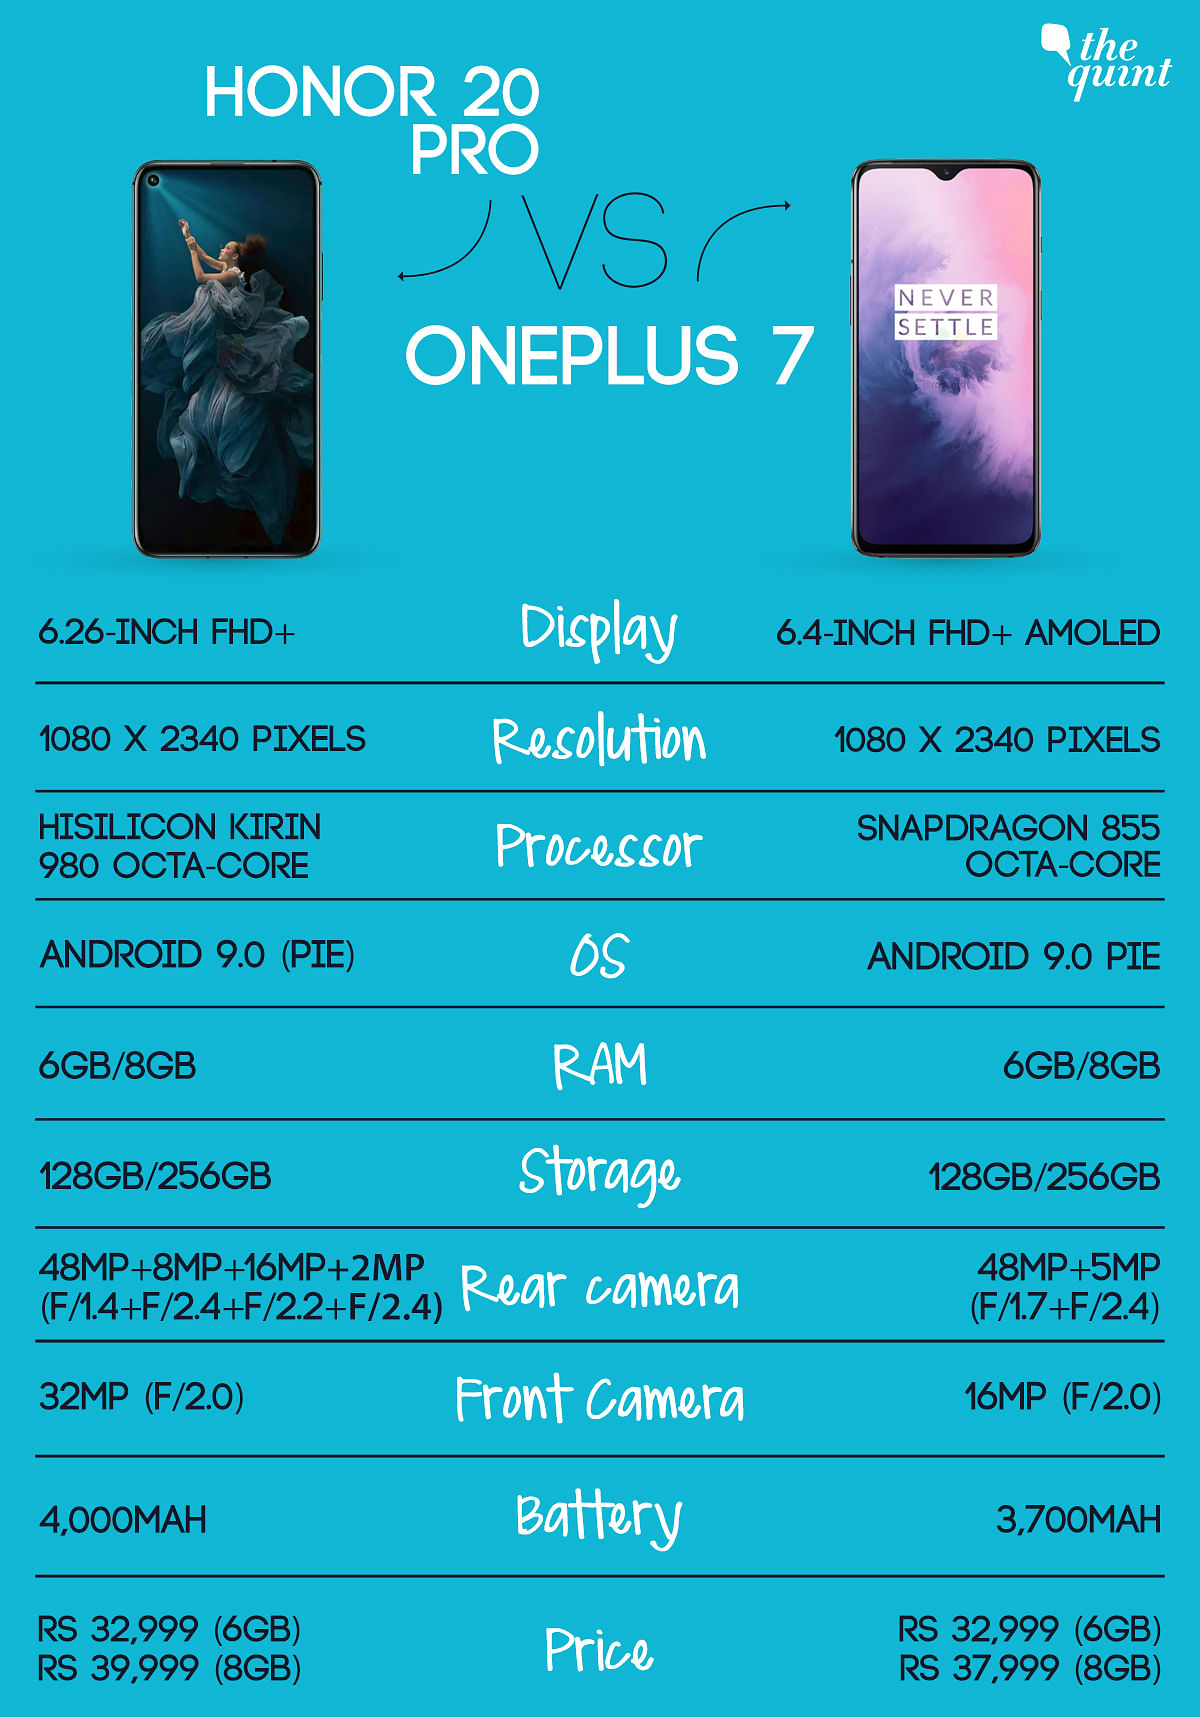 Honor 20 Pro is the latest device in the market and is in the same price bracket as the OnePlus 7.